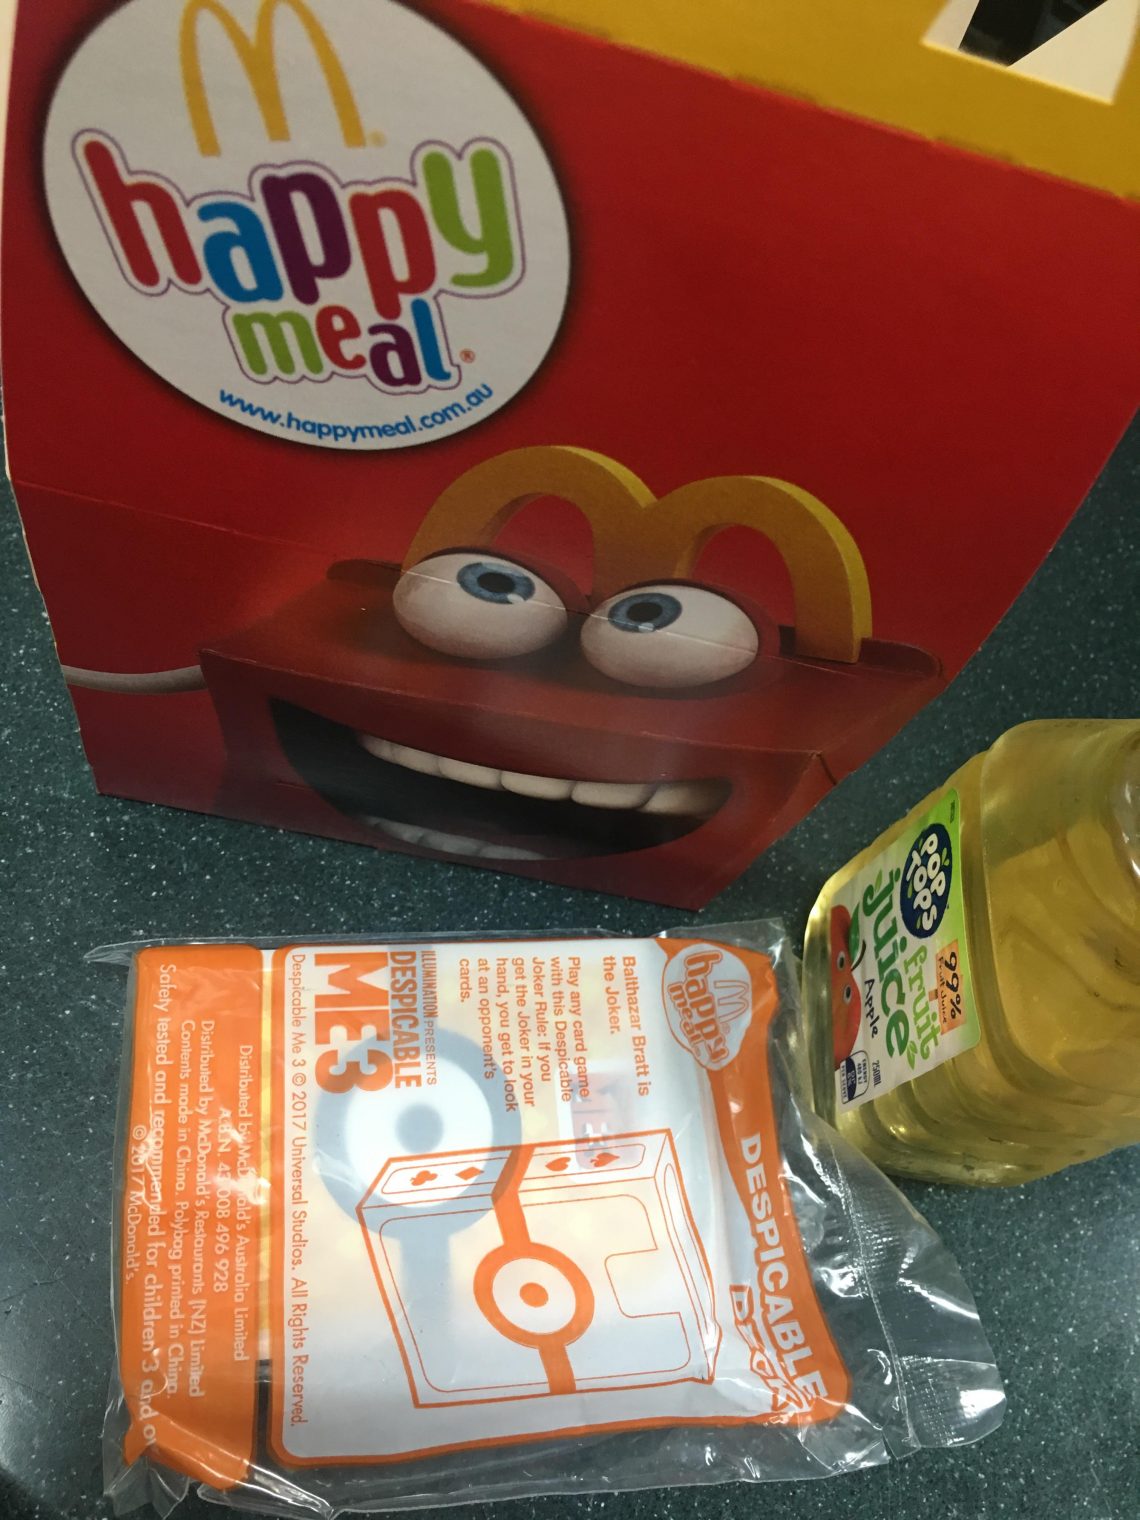 happy meal - The City Journal